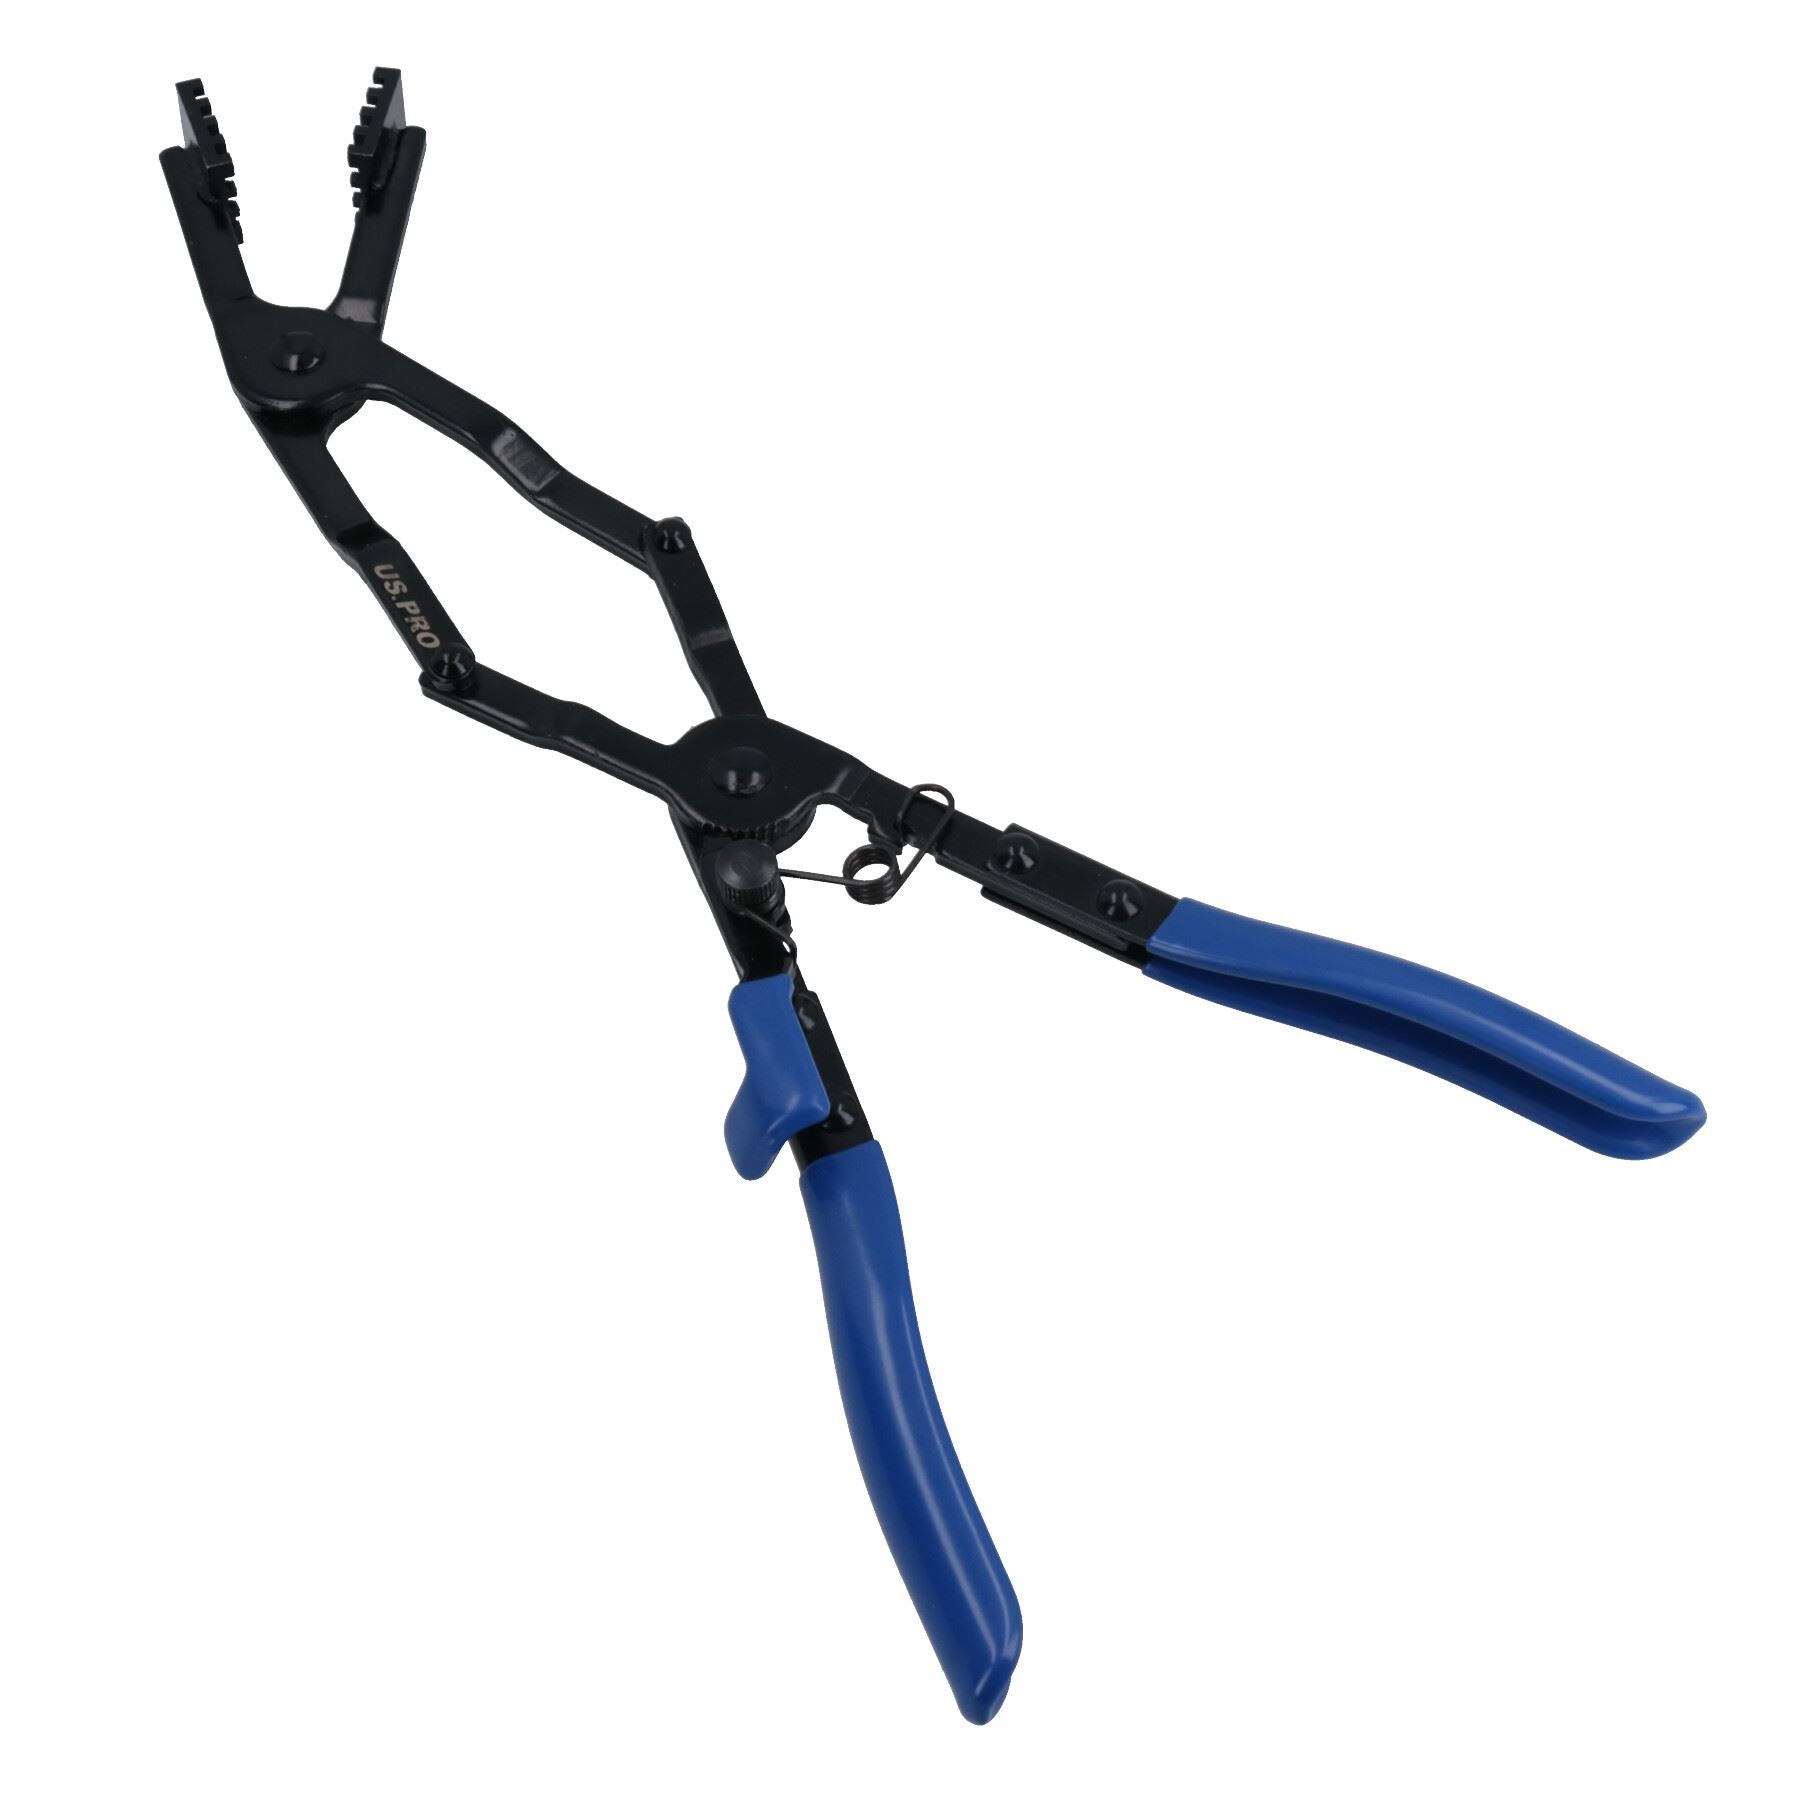 Double Jointed Angled Long Reach Hose Clamp Pliers Remover 50mm Capacity